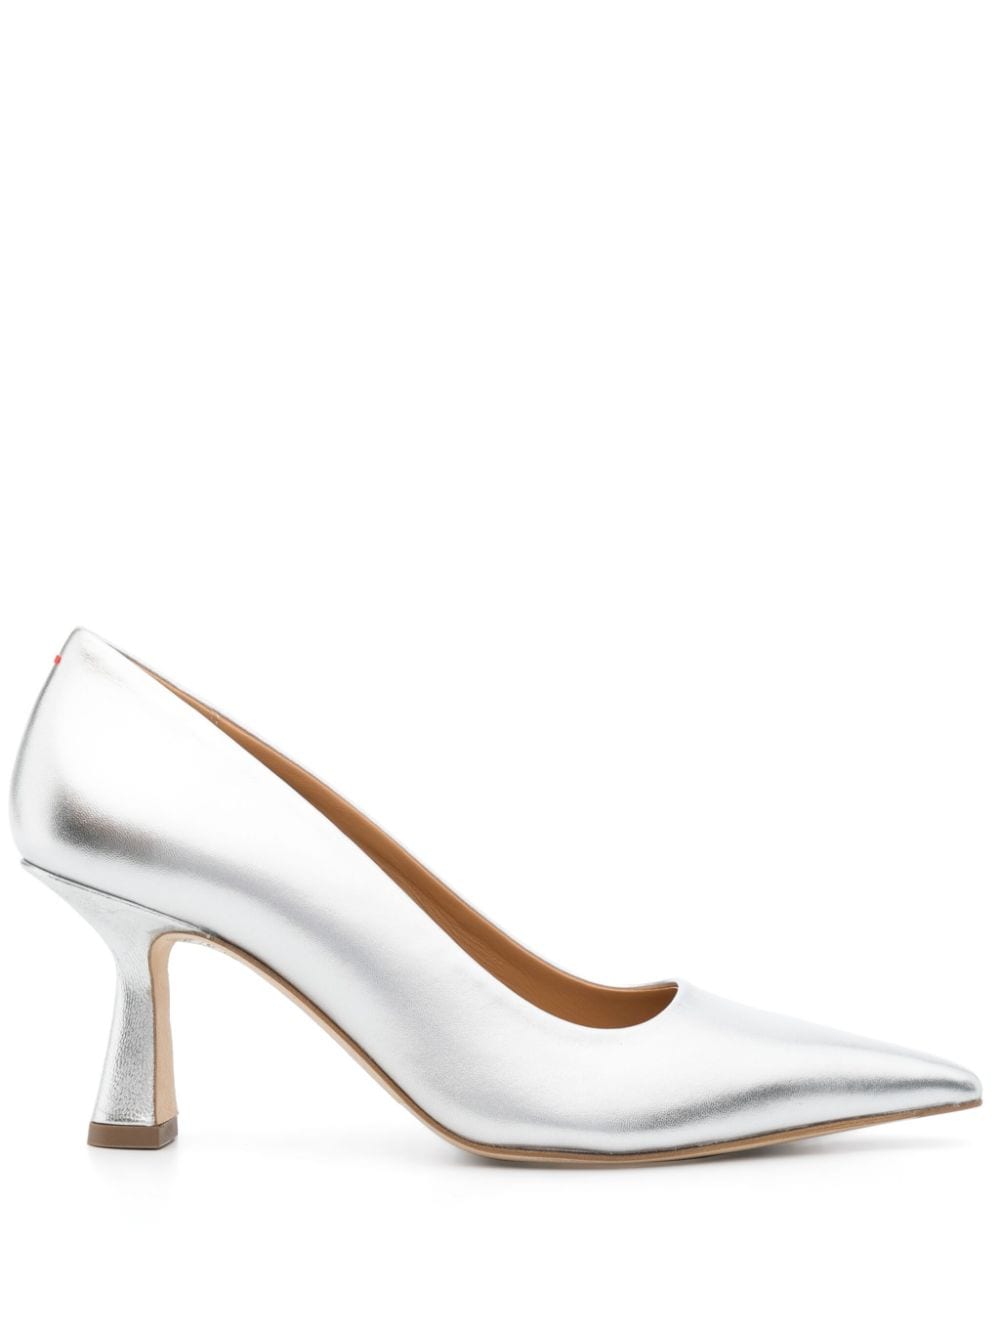 Aeyde Xandra 75mm leather pumps - Silver von Aeyde